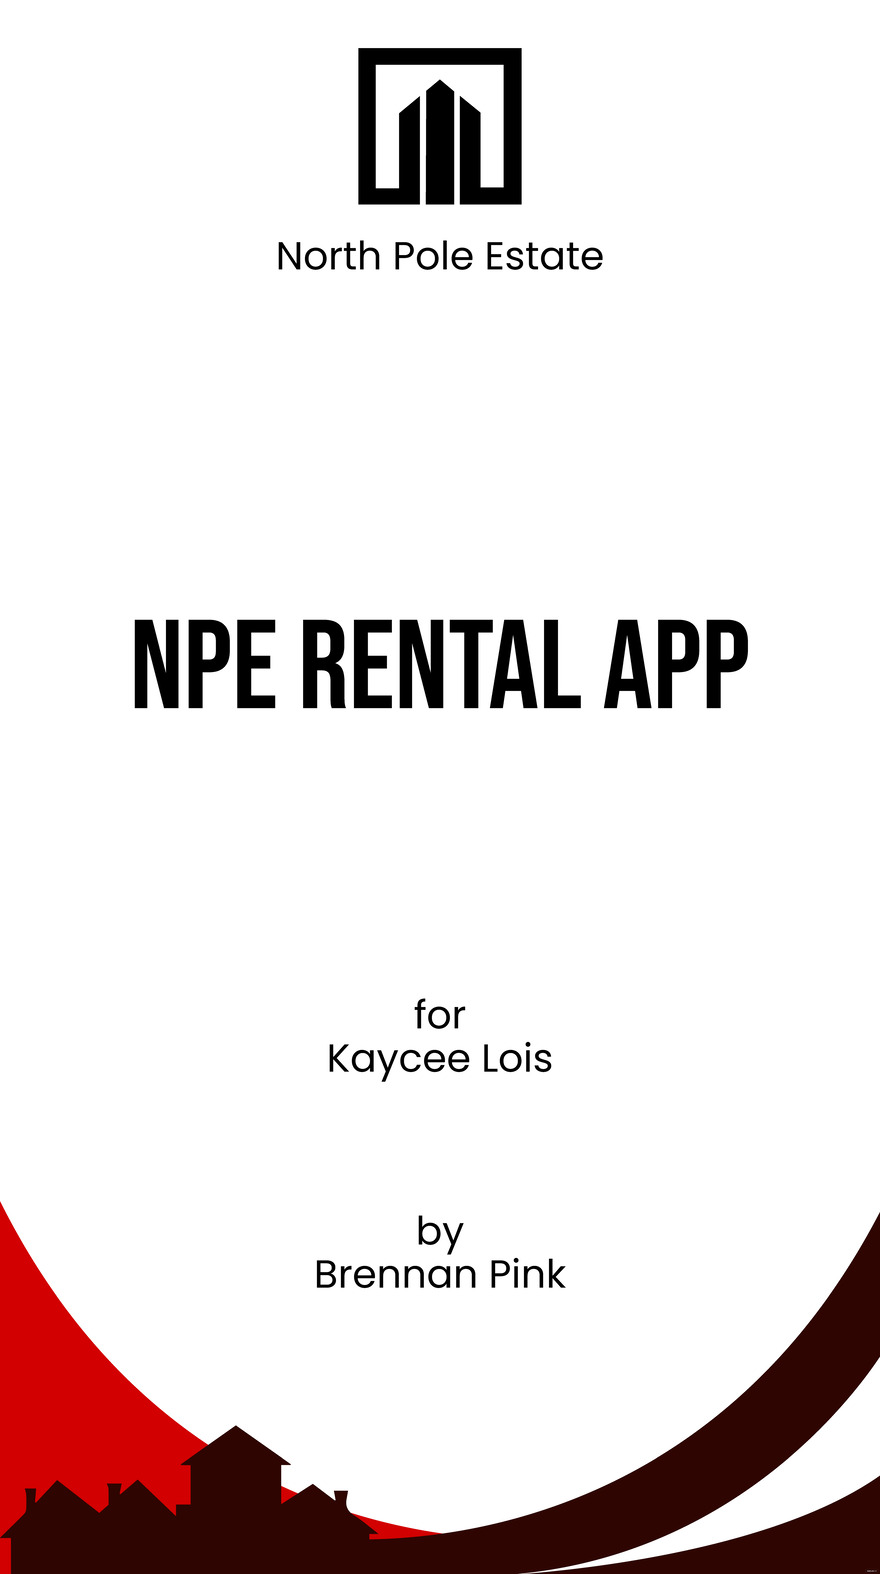 rental app promotion mobile presentation ideas and examples